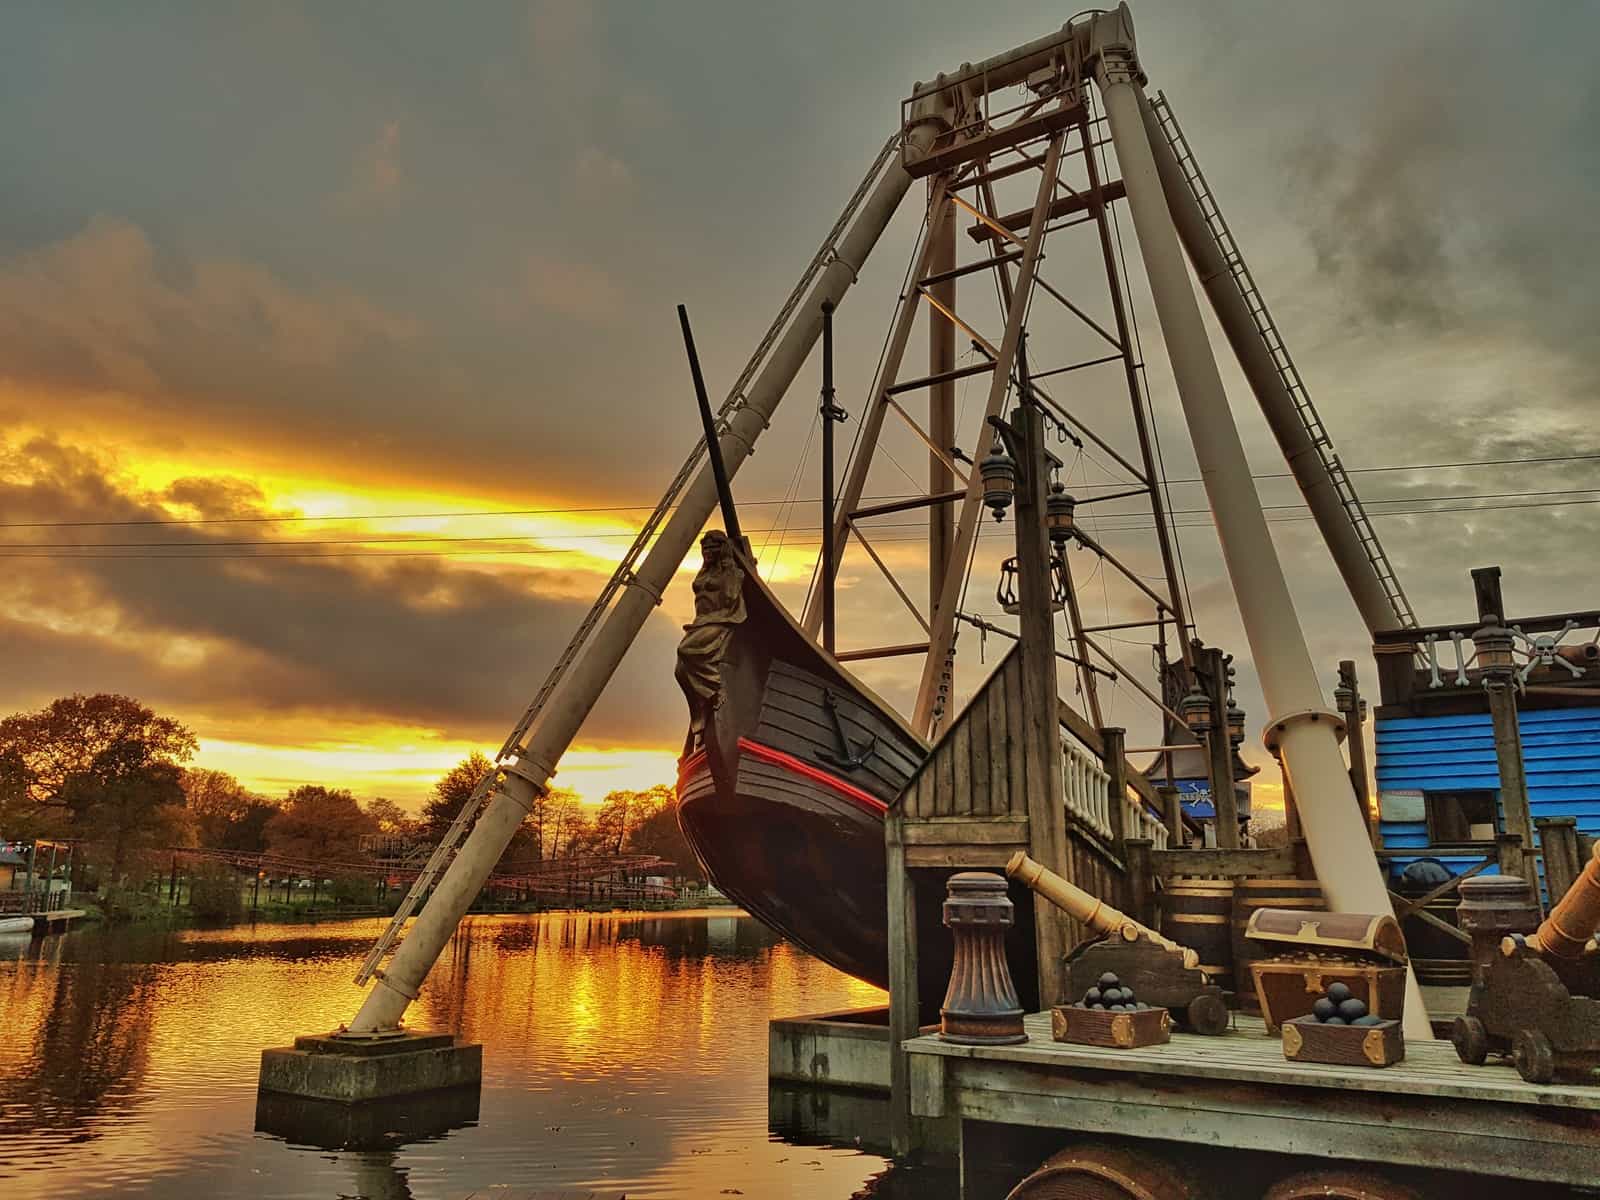 Sunset over the pirate ship at Drayton Manor Theme Park and Zoo in Tamworth, Staffordshire